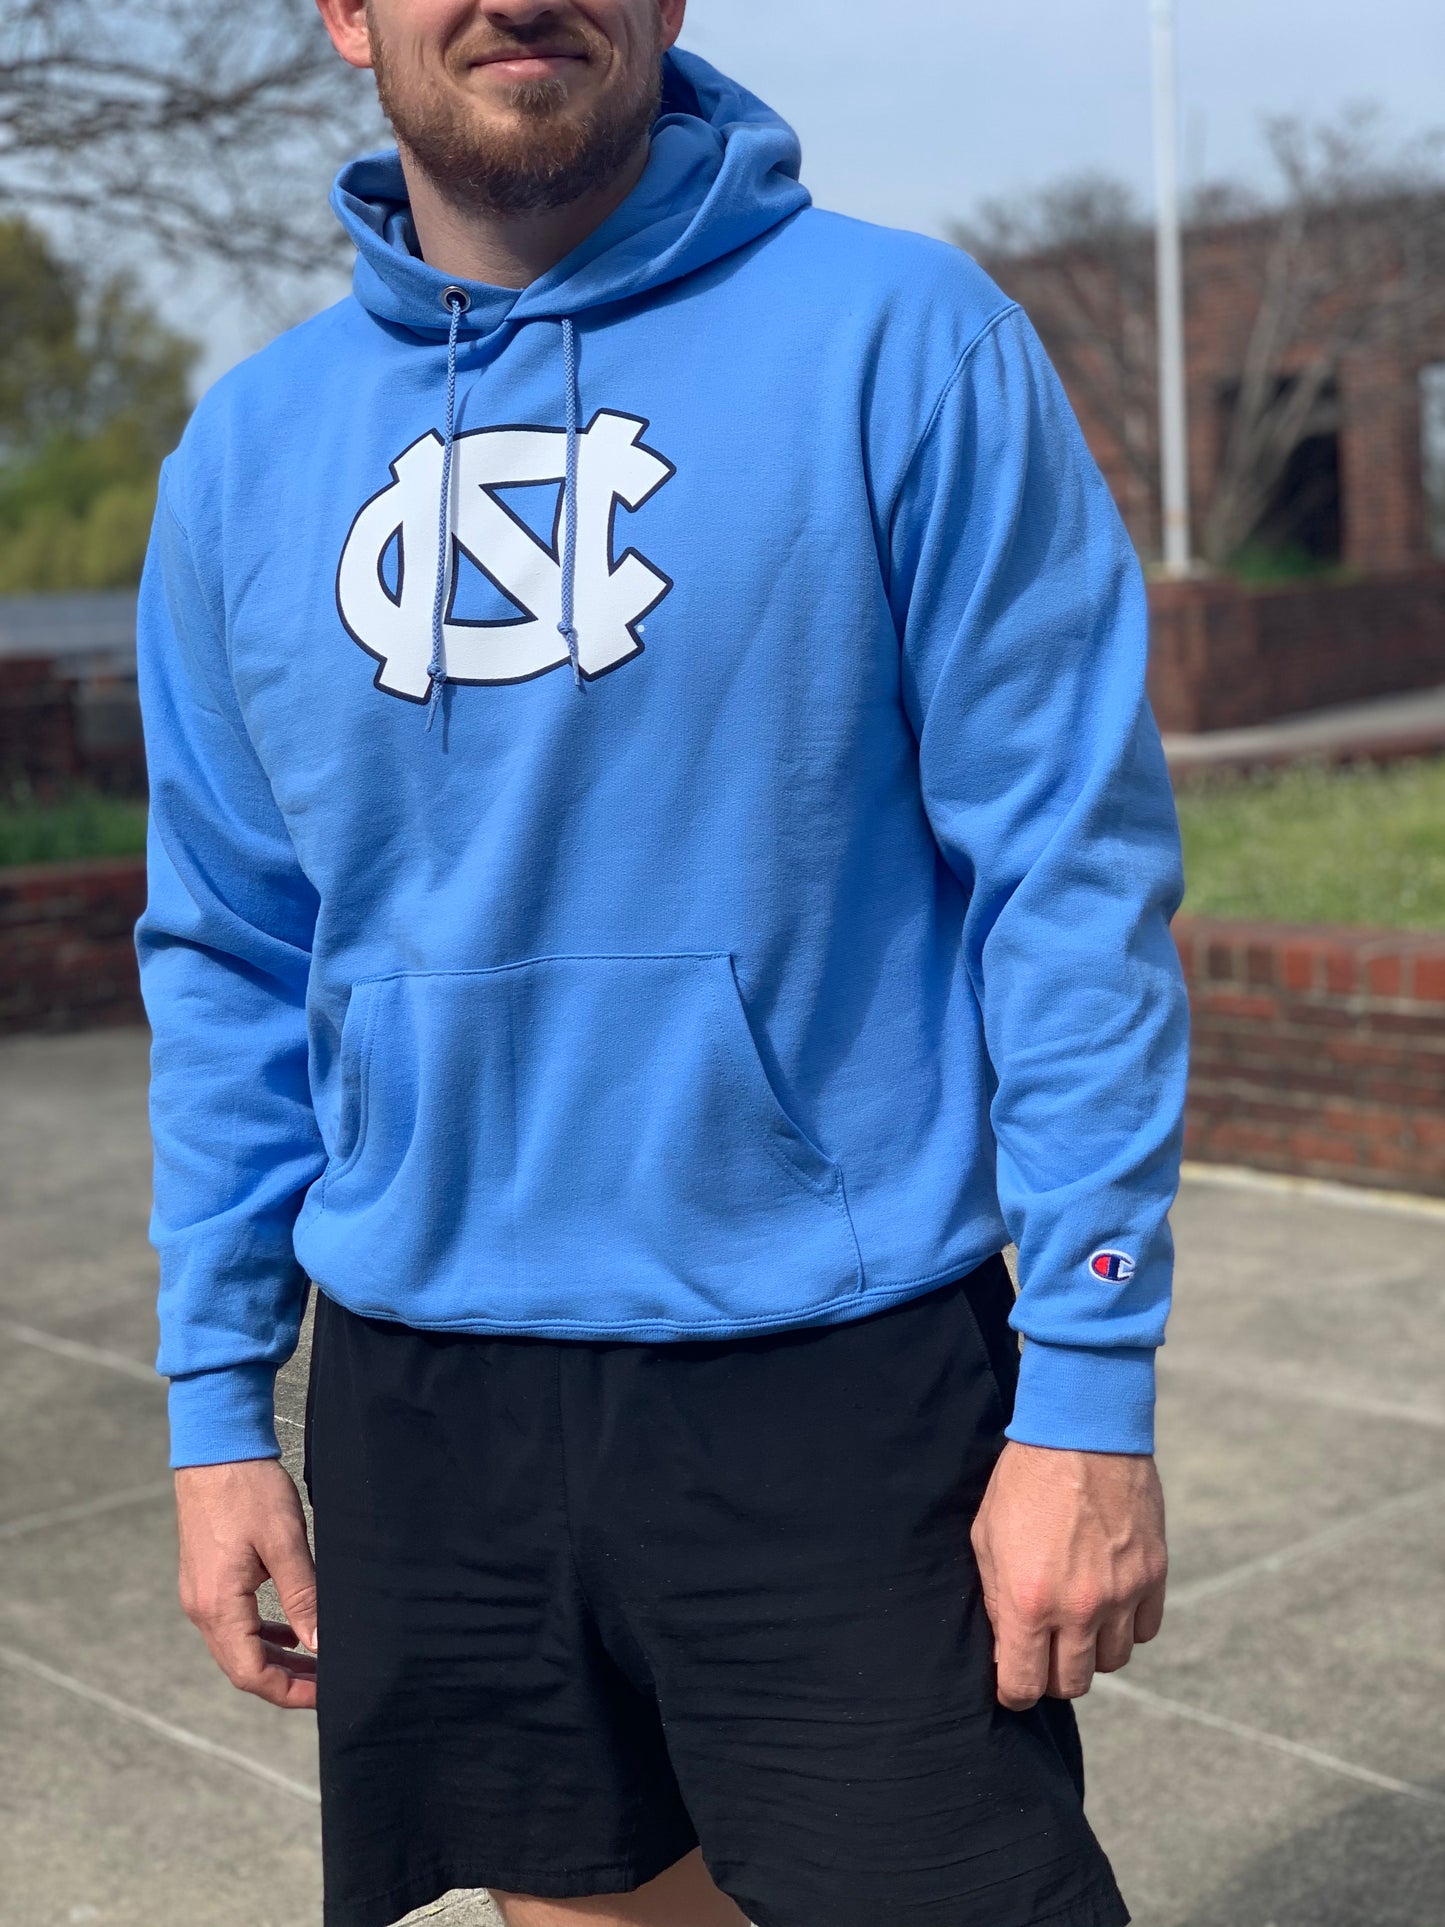 UNC Game Day Hoodie by Champion